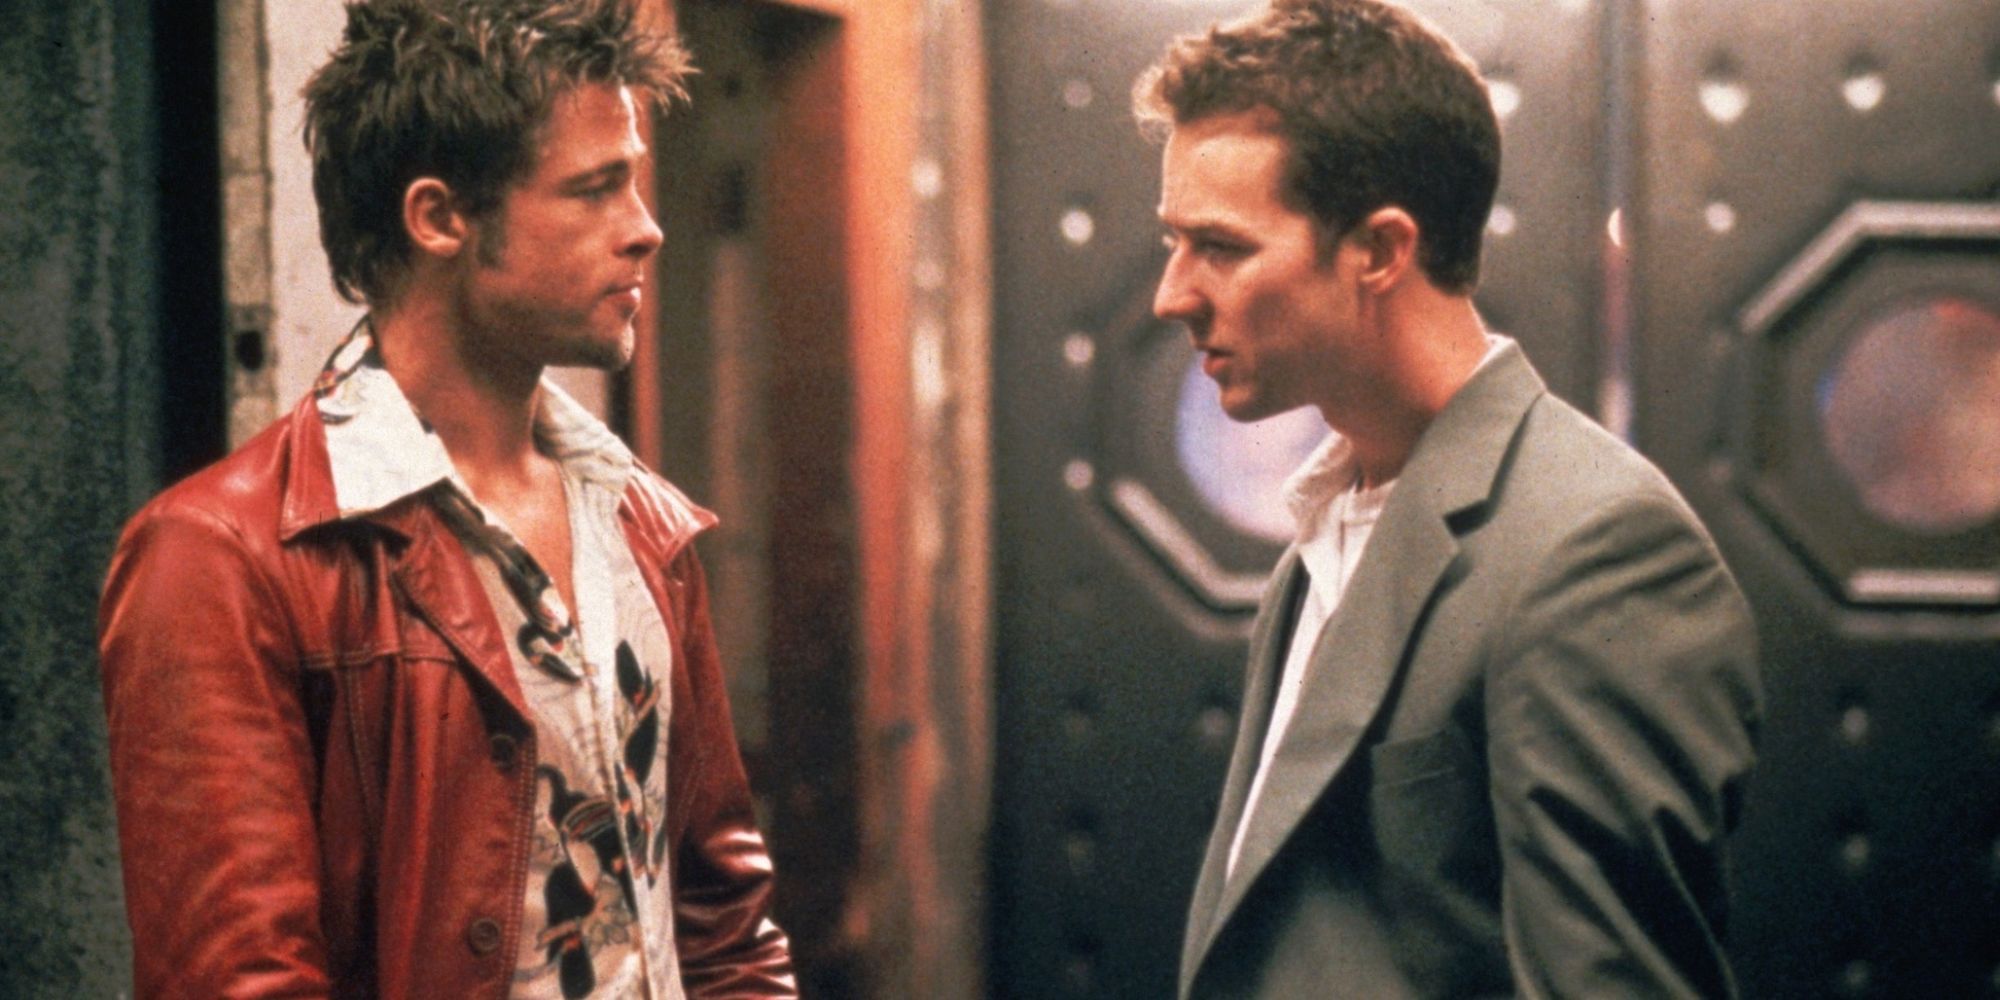 Brad Pitt and Edward Norton in a still from 'Fight Club'